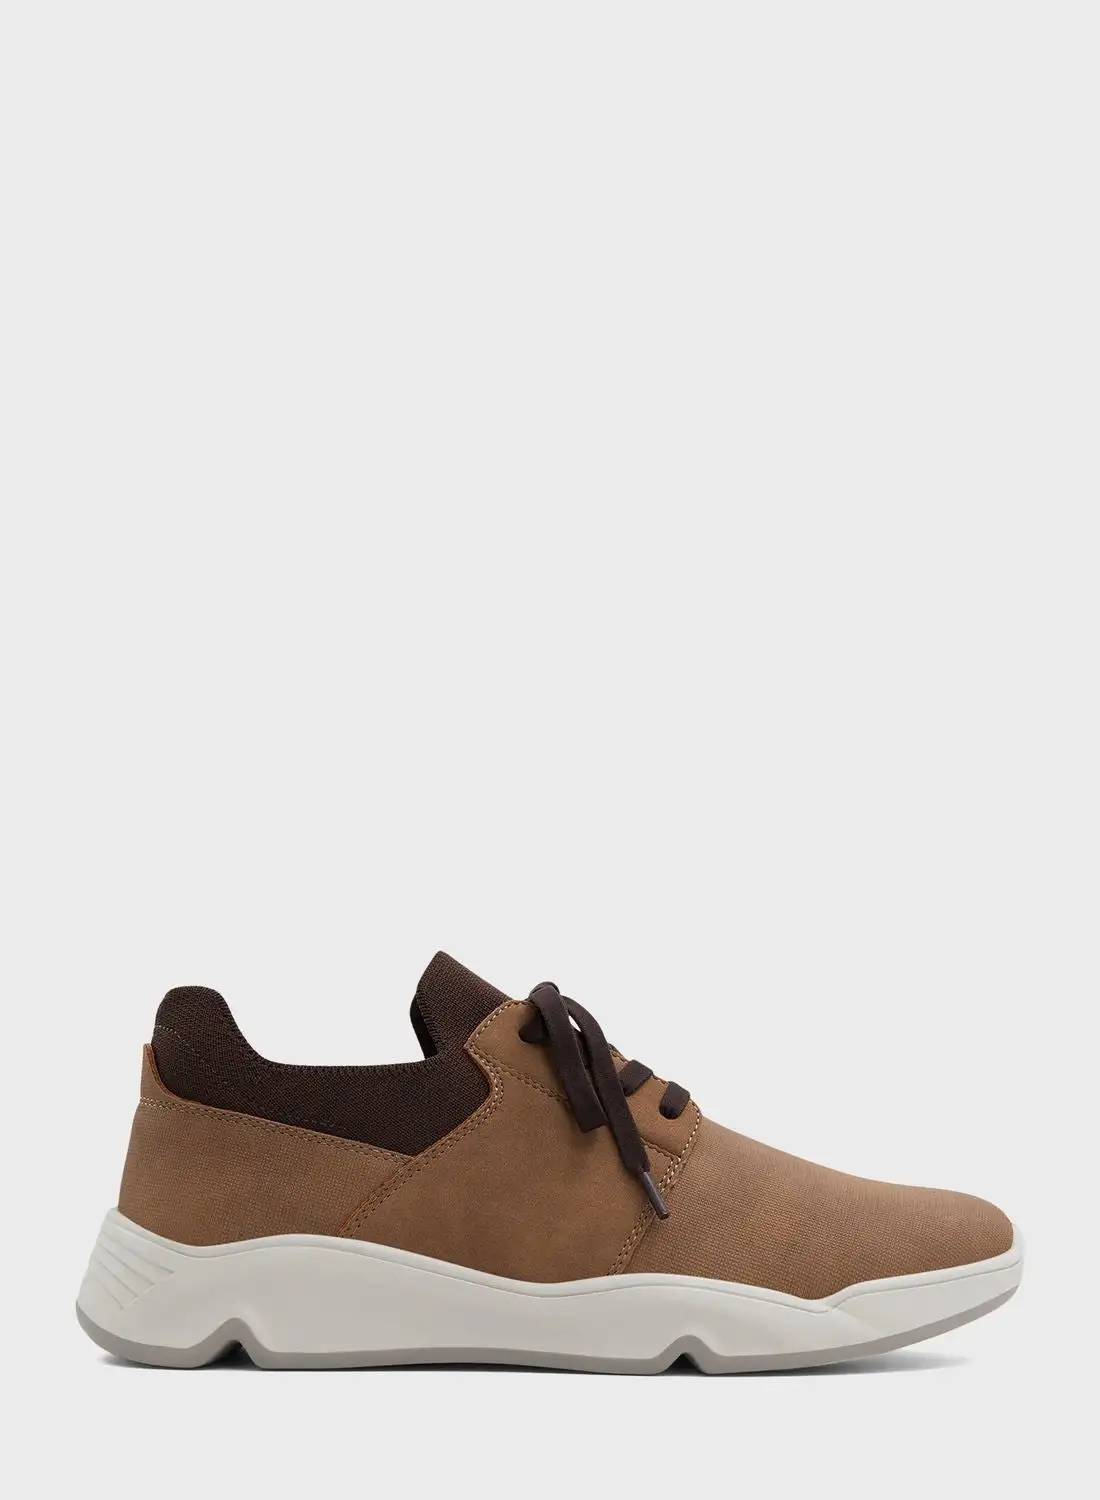 ALDO Sintra Casual Lace Up Sneakers